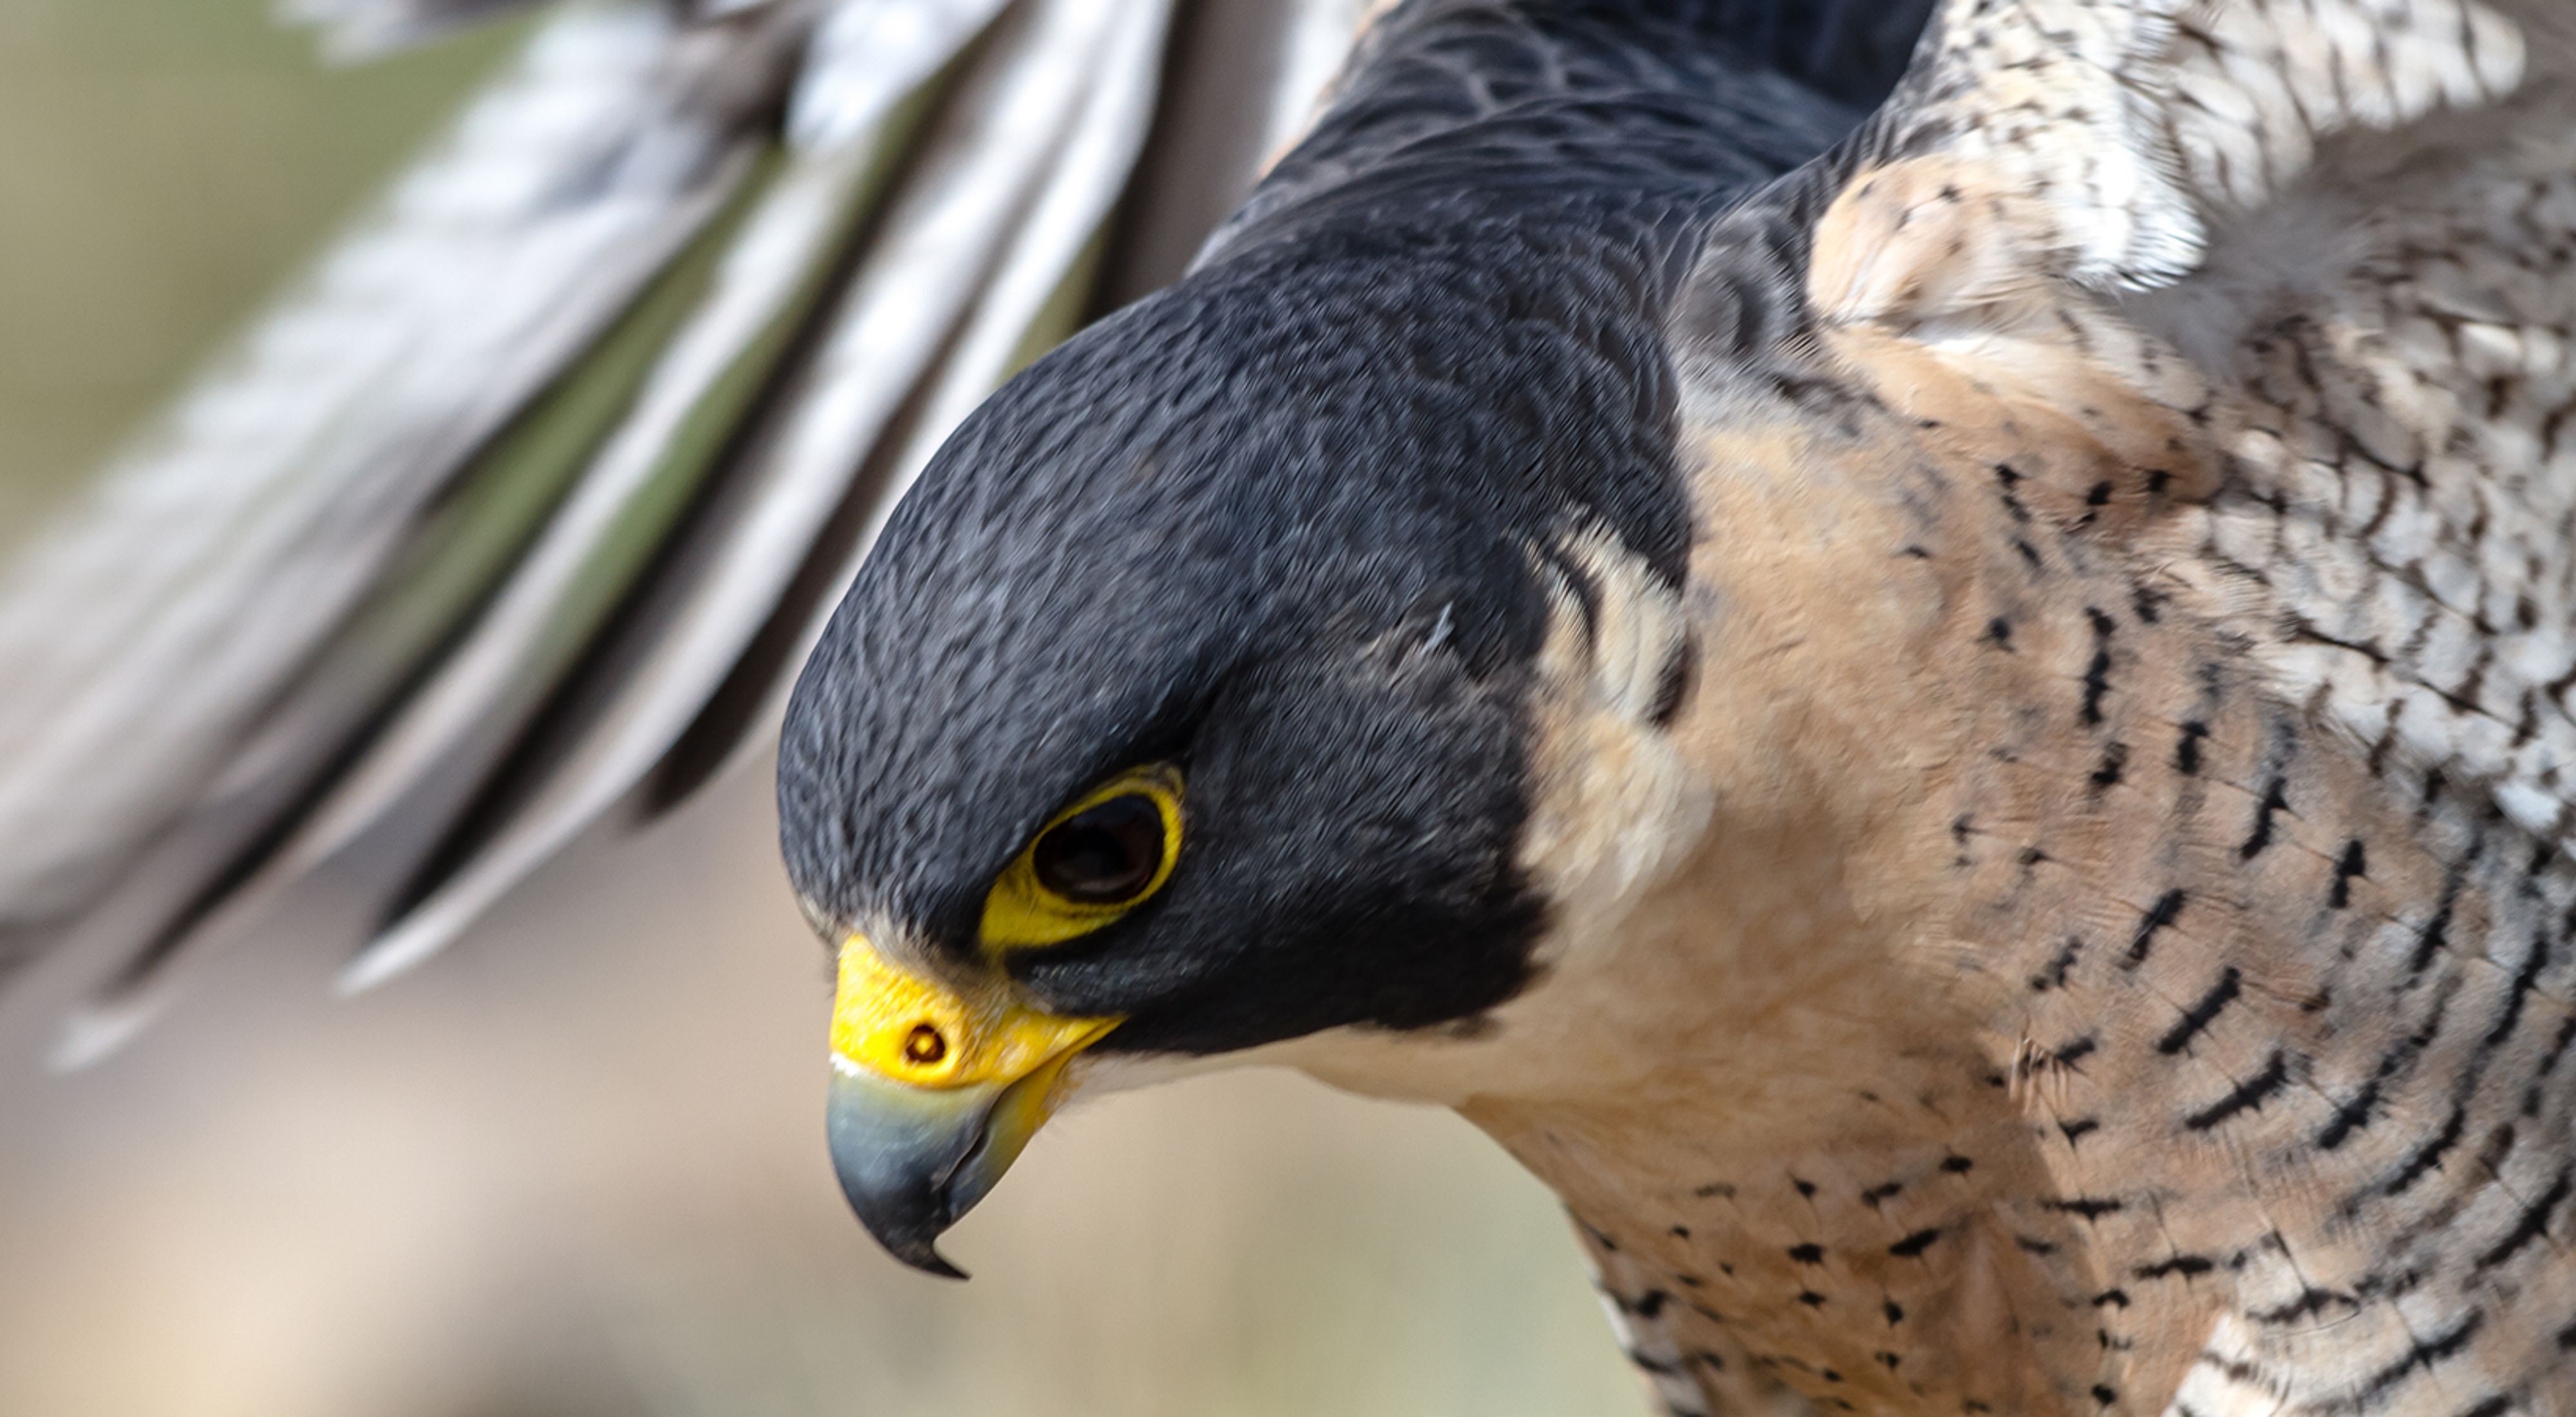 Birds of prey face global decline from habitat loss, poisons